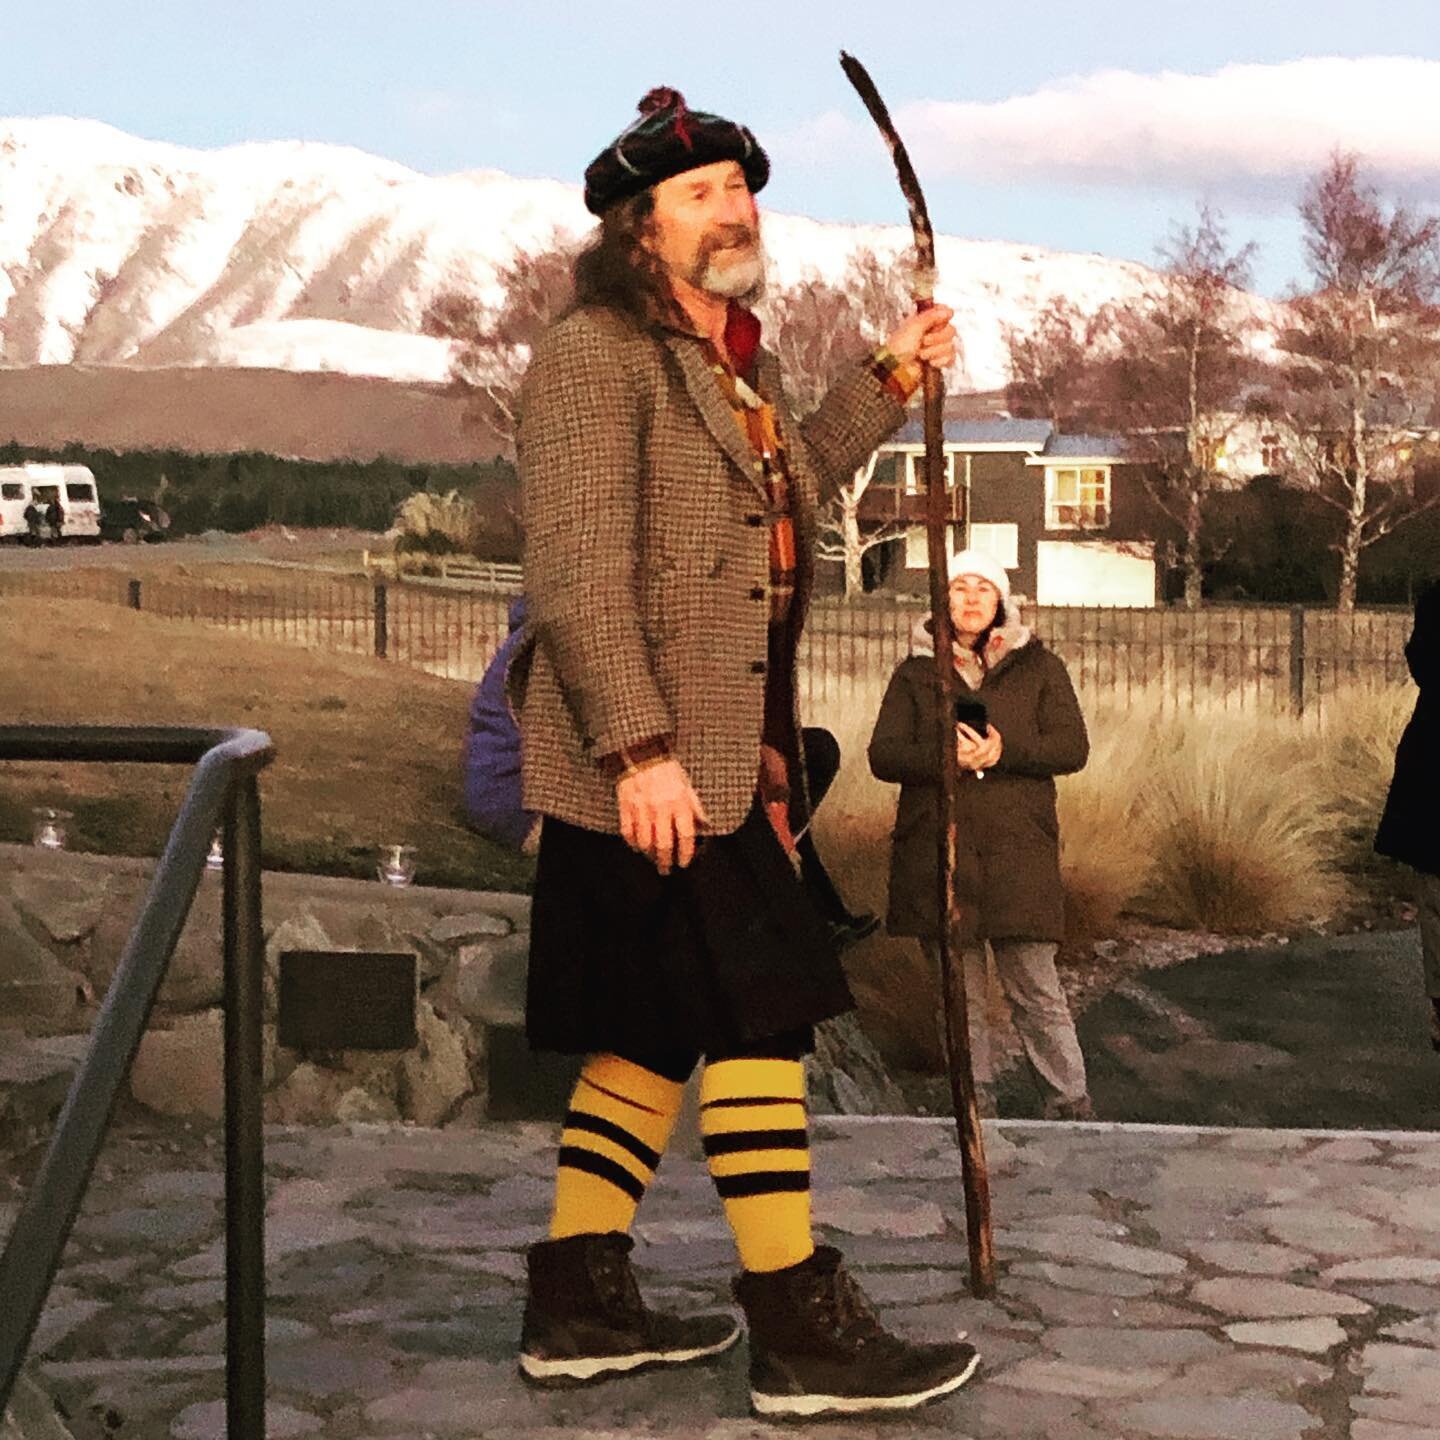 Scotsman, snow and song. High times in Tekapo.